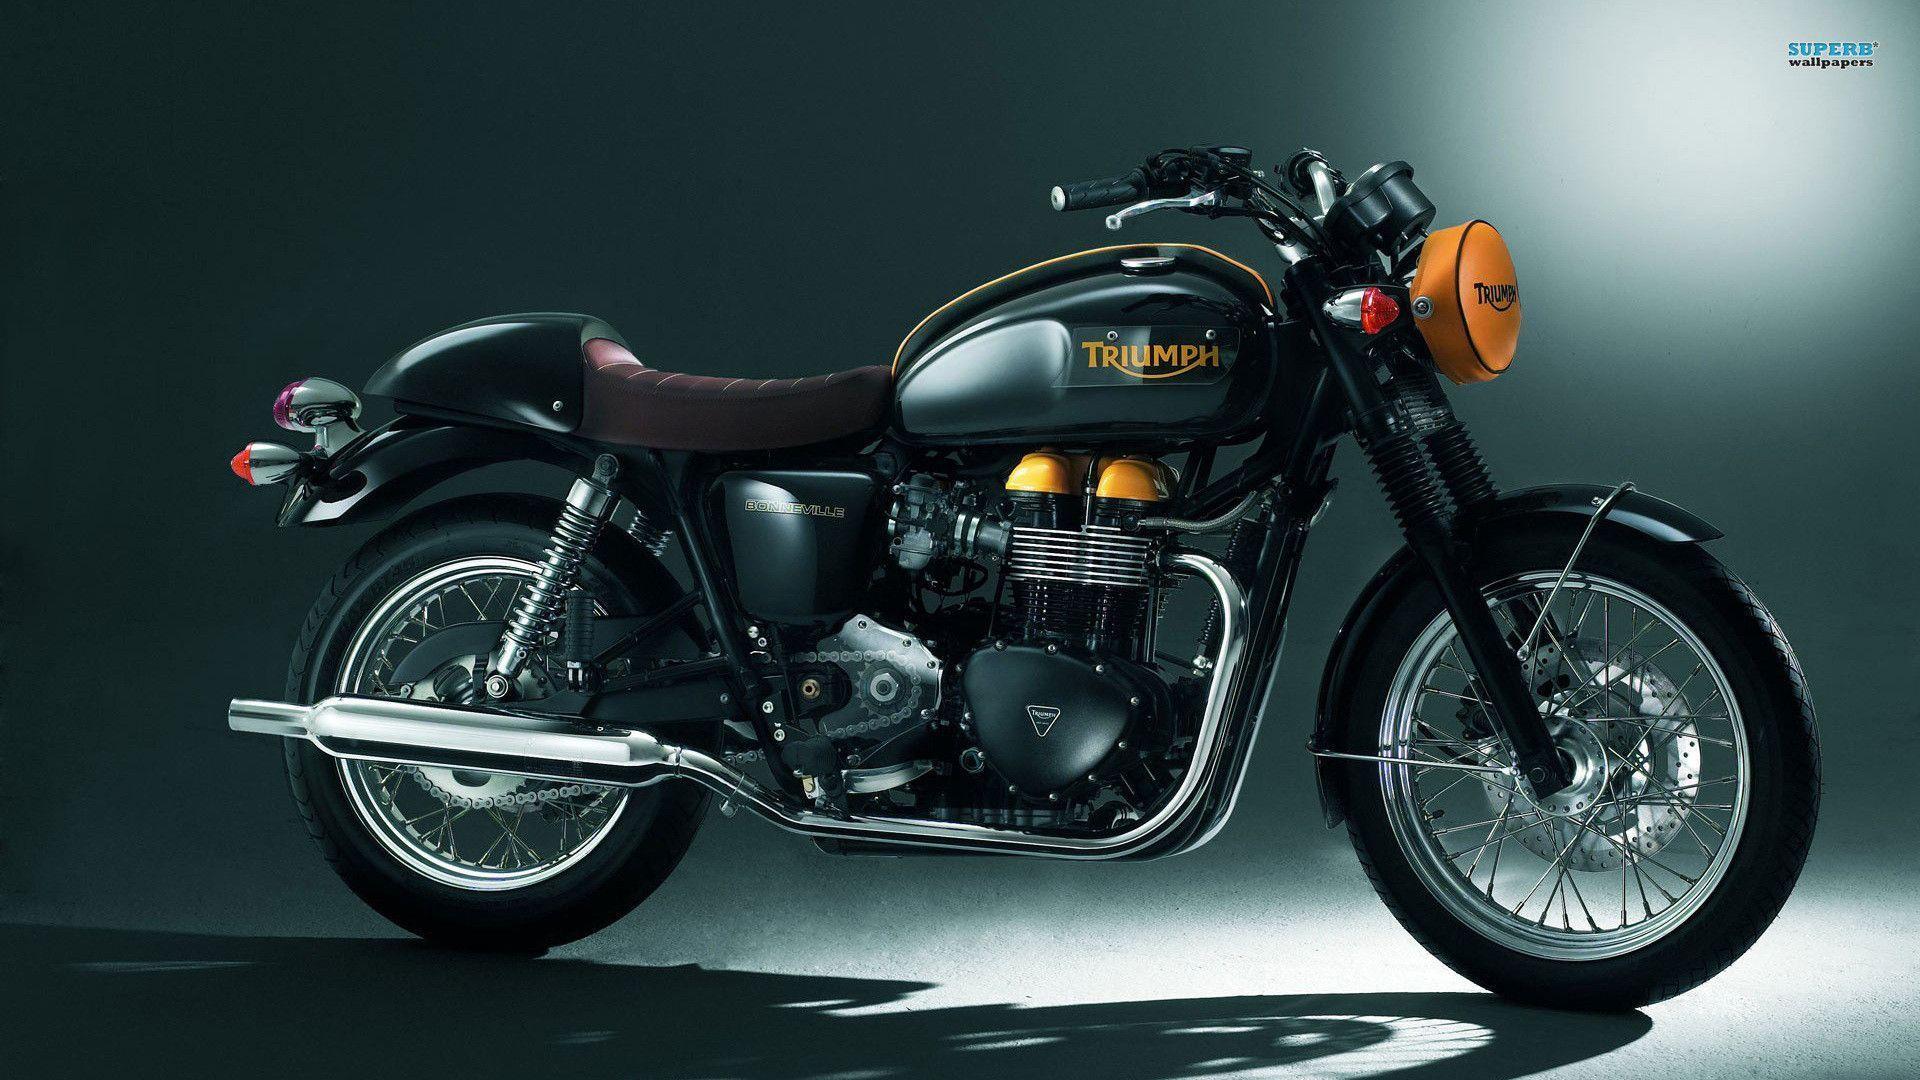 Triumph Motorcycle Wallpapers on WallpaperDog